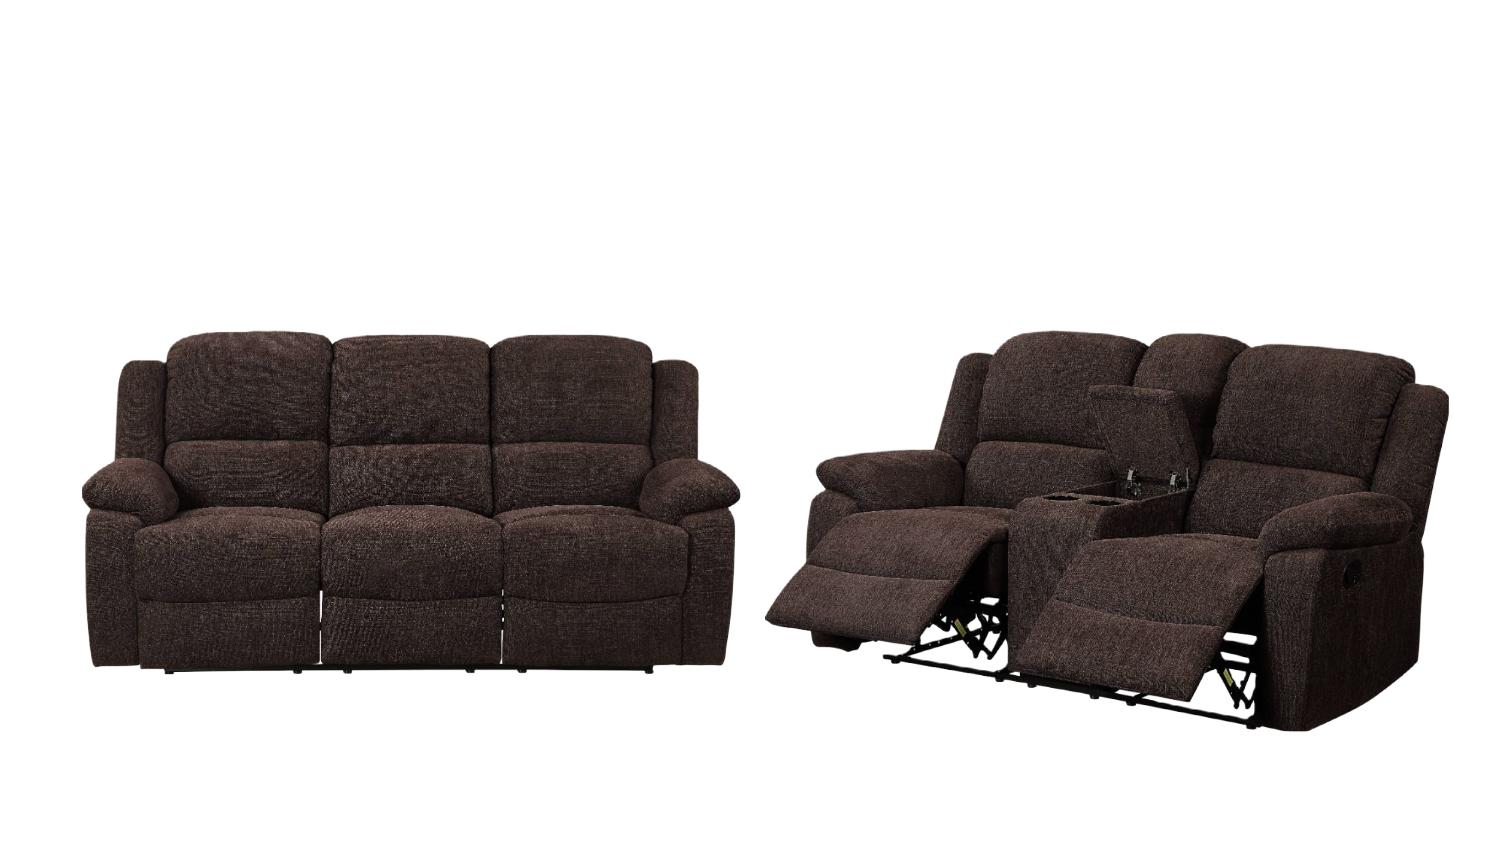 Contemporary Sofa and Loveseat Set Madden 55445-2pcs in Brown Chenille